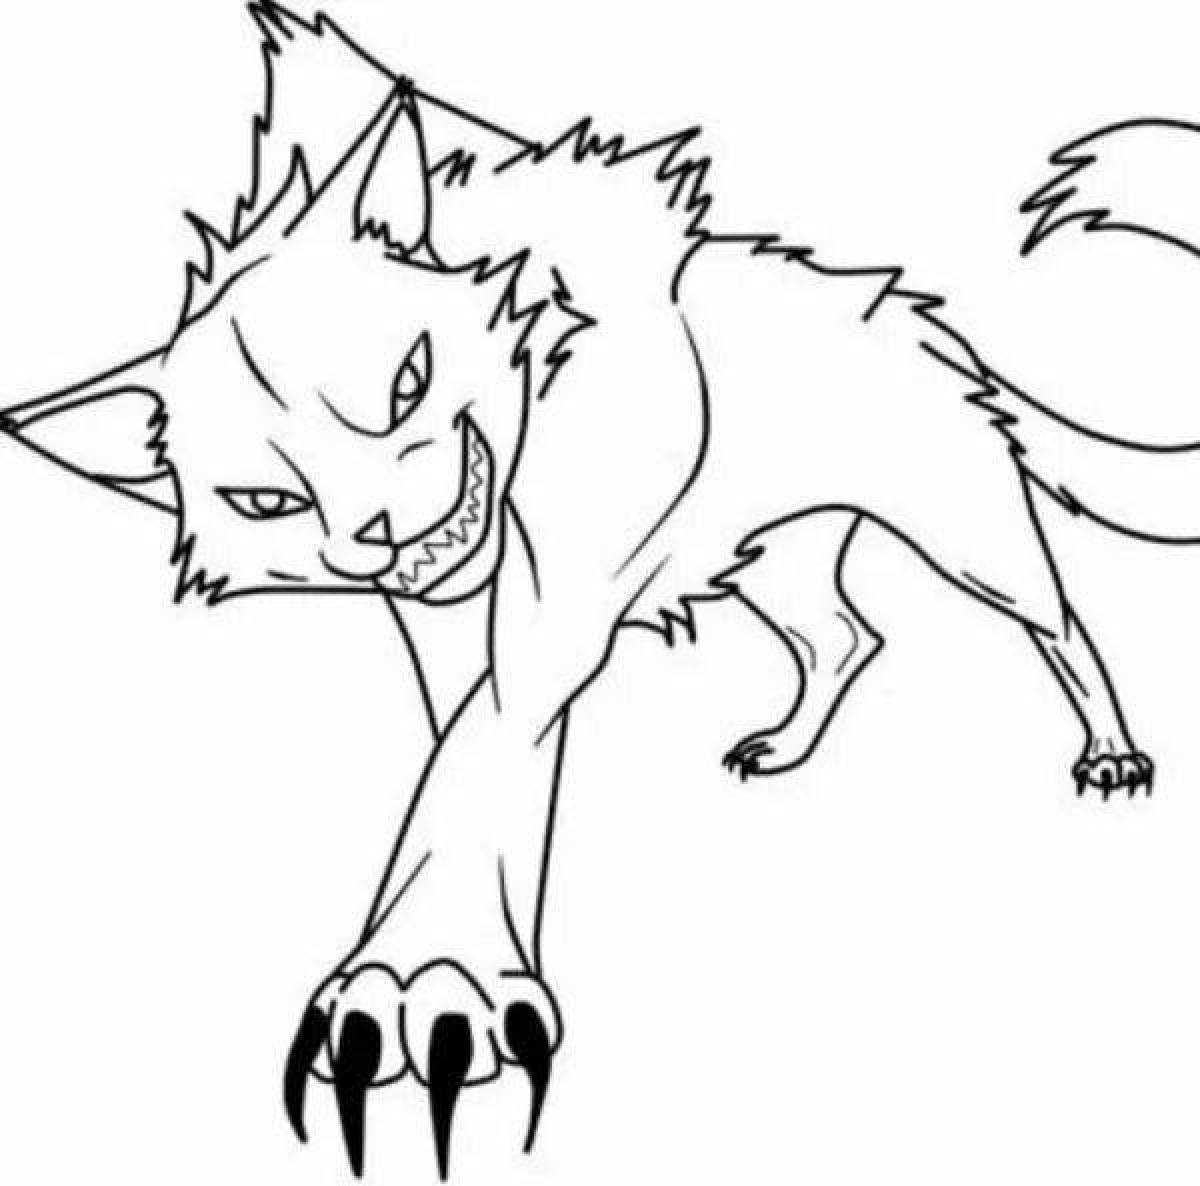 Warrior cats scourge #1